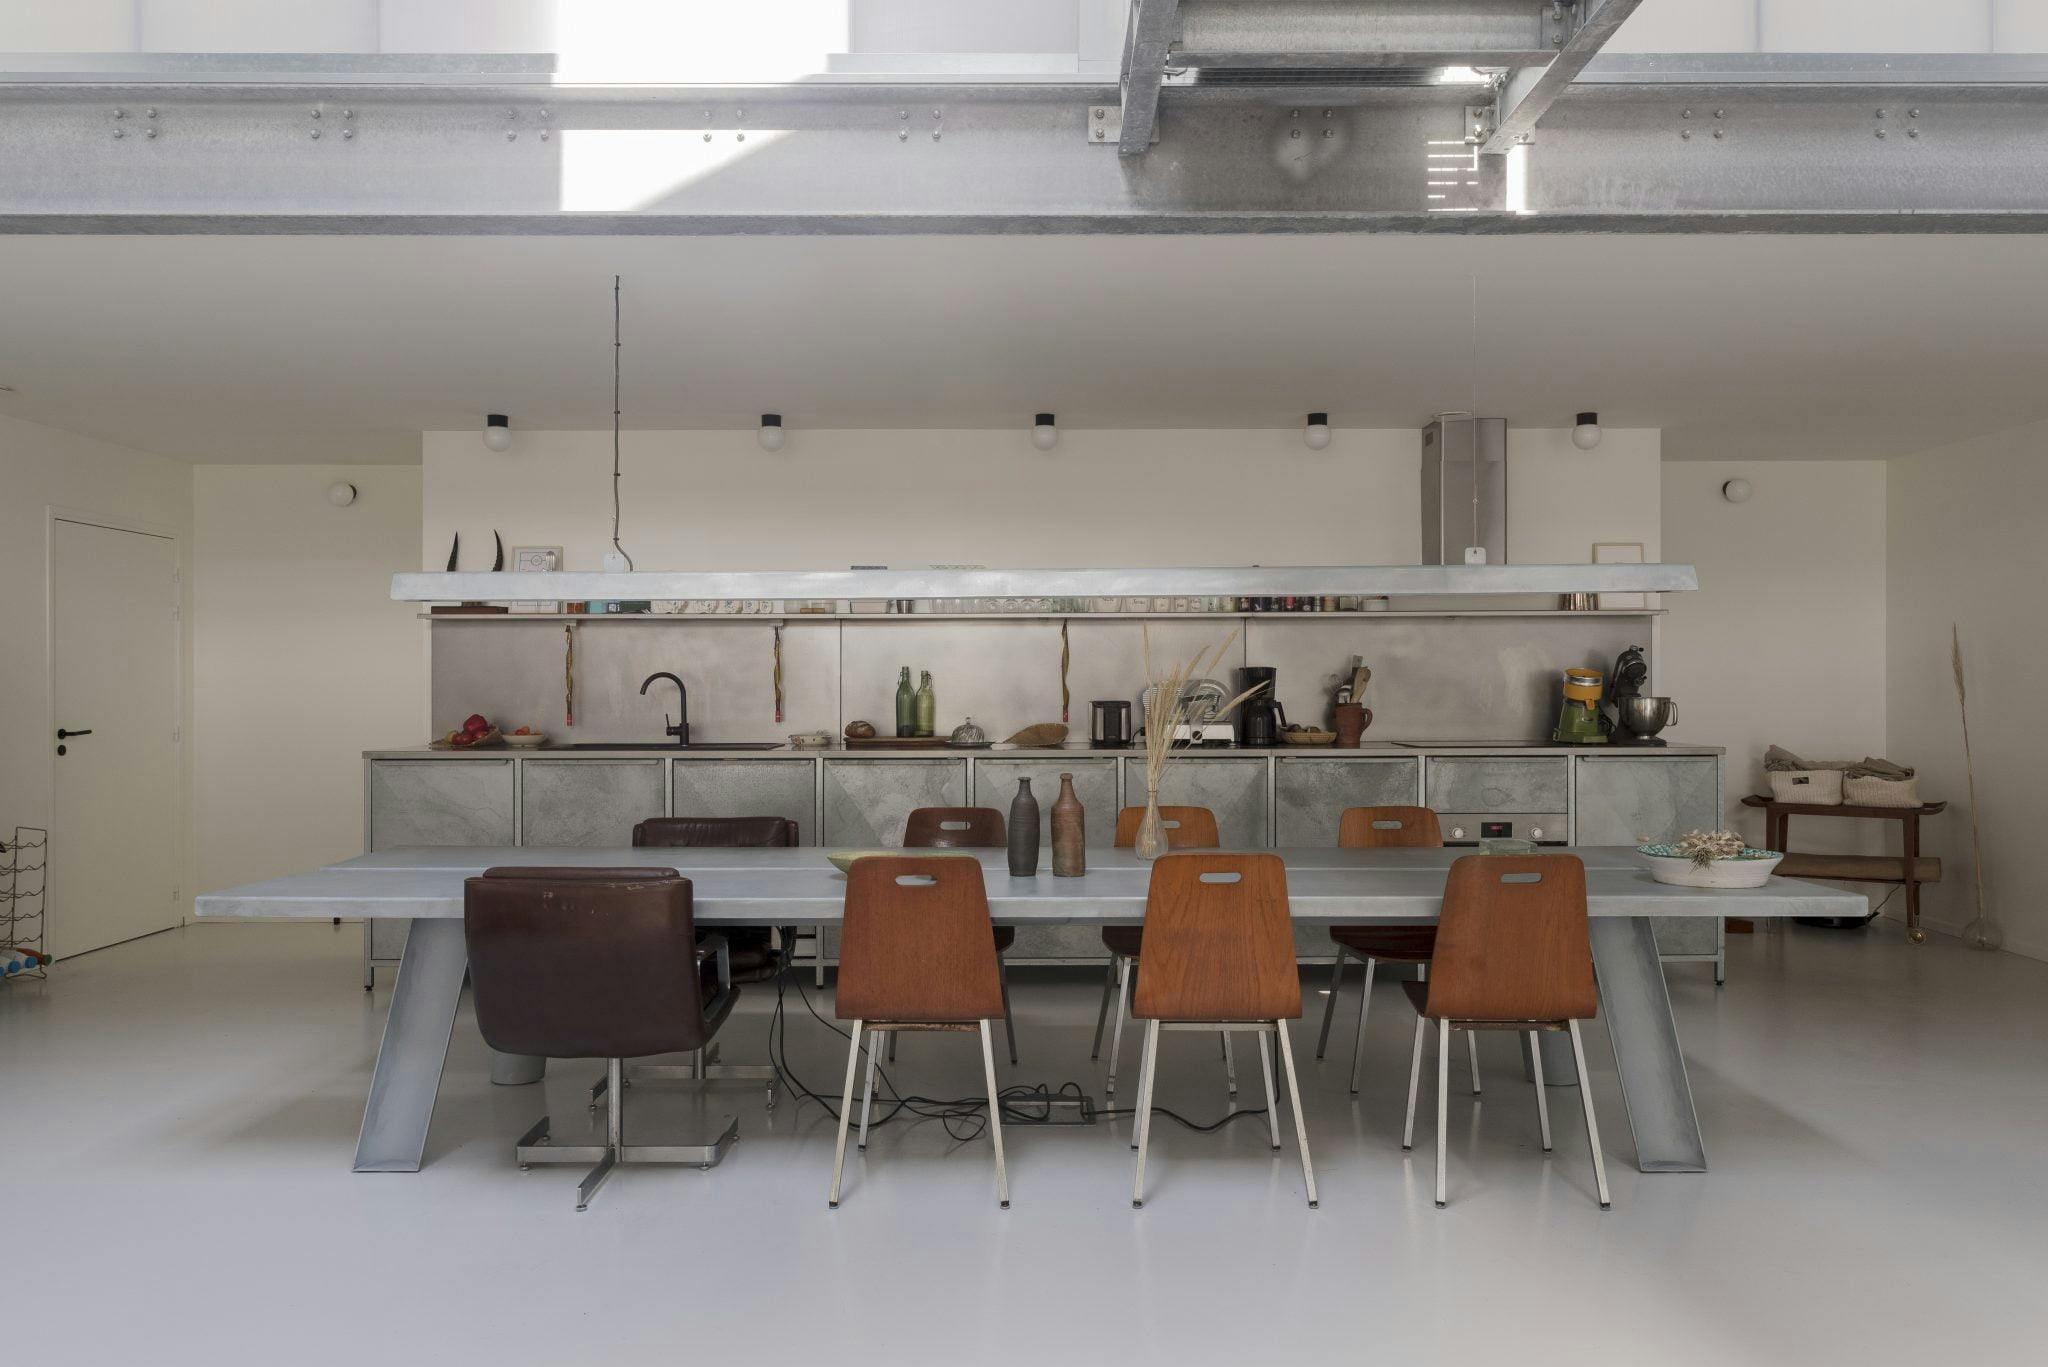 The stainless steel kitchen and its industrial dining table